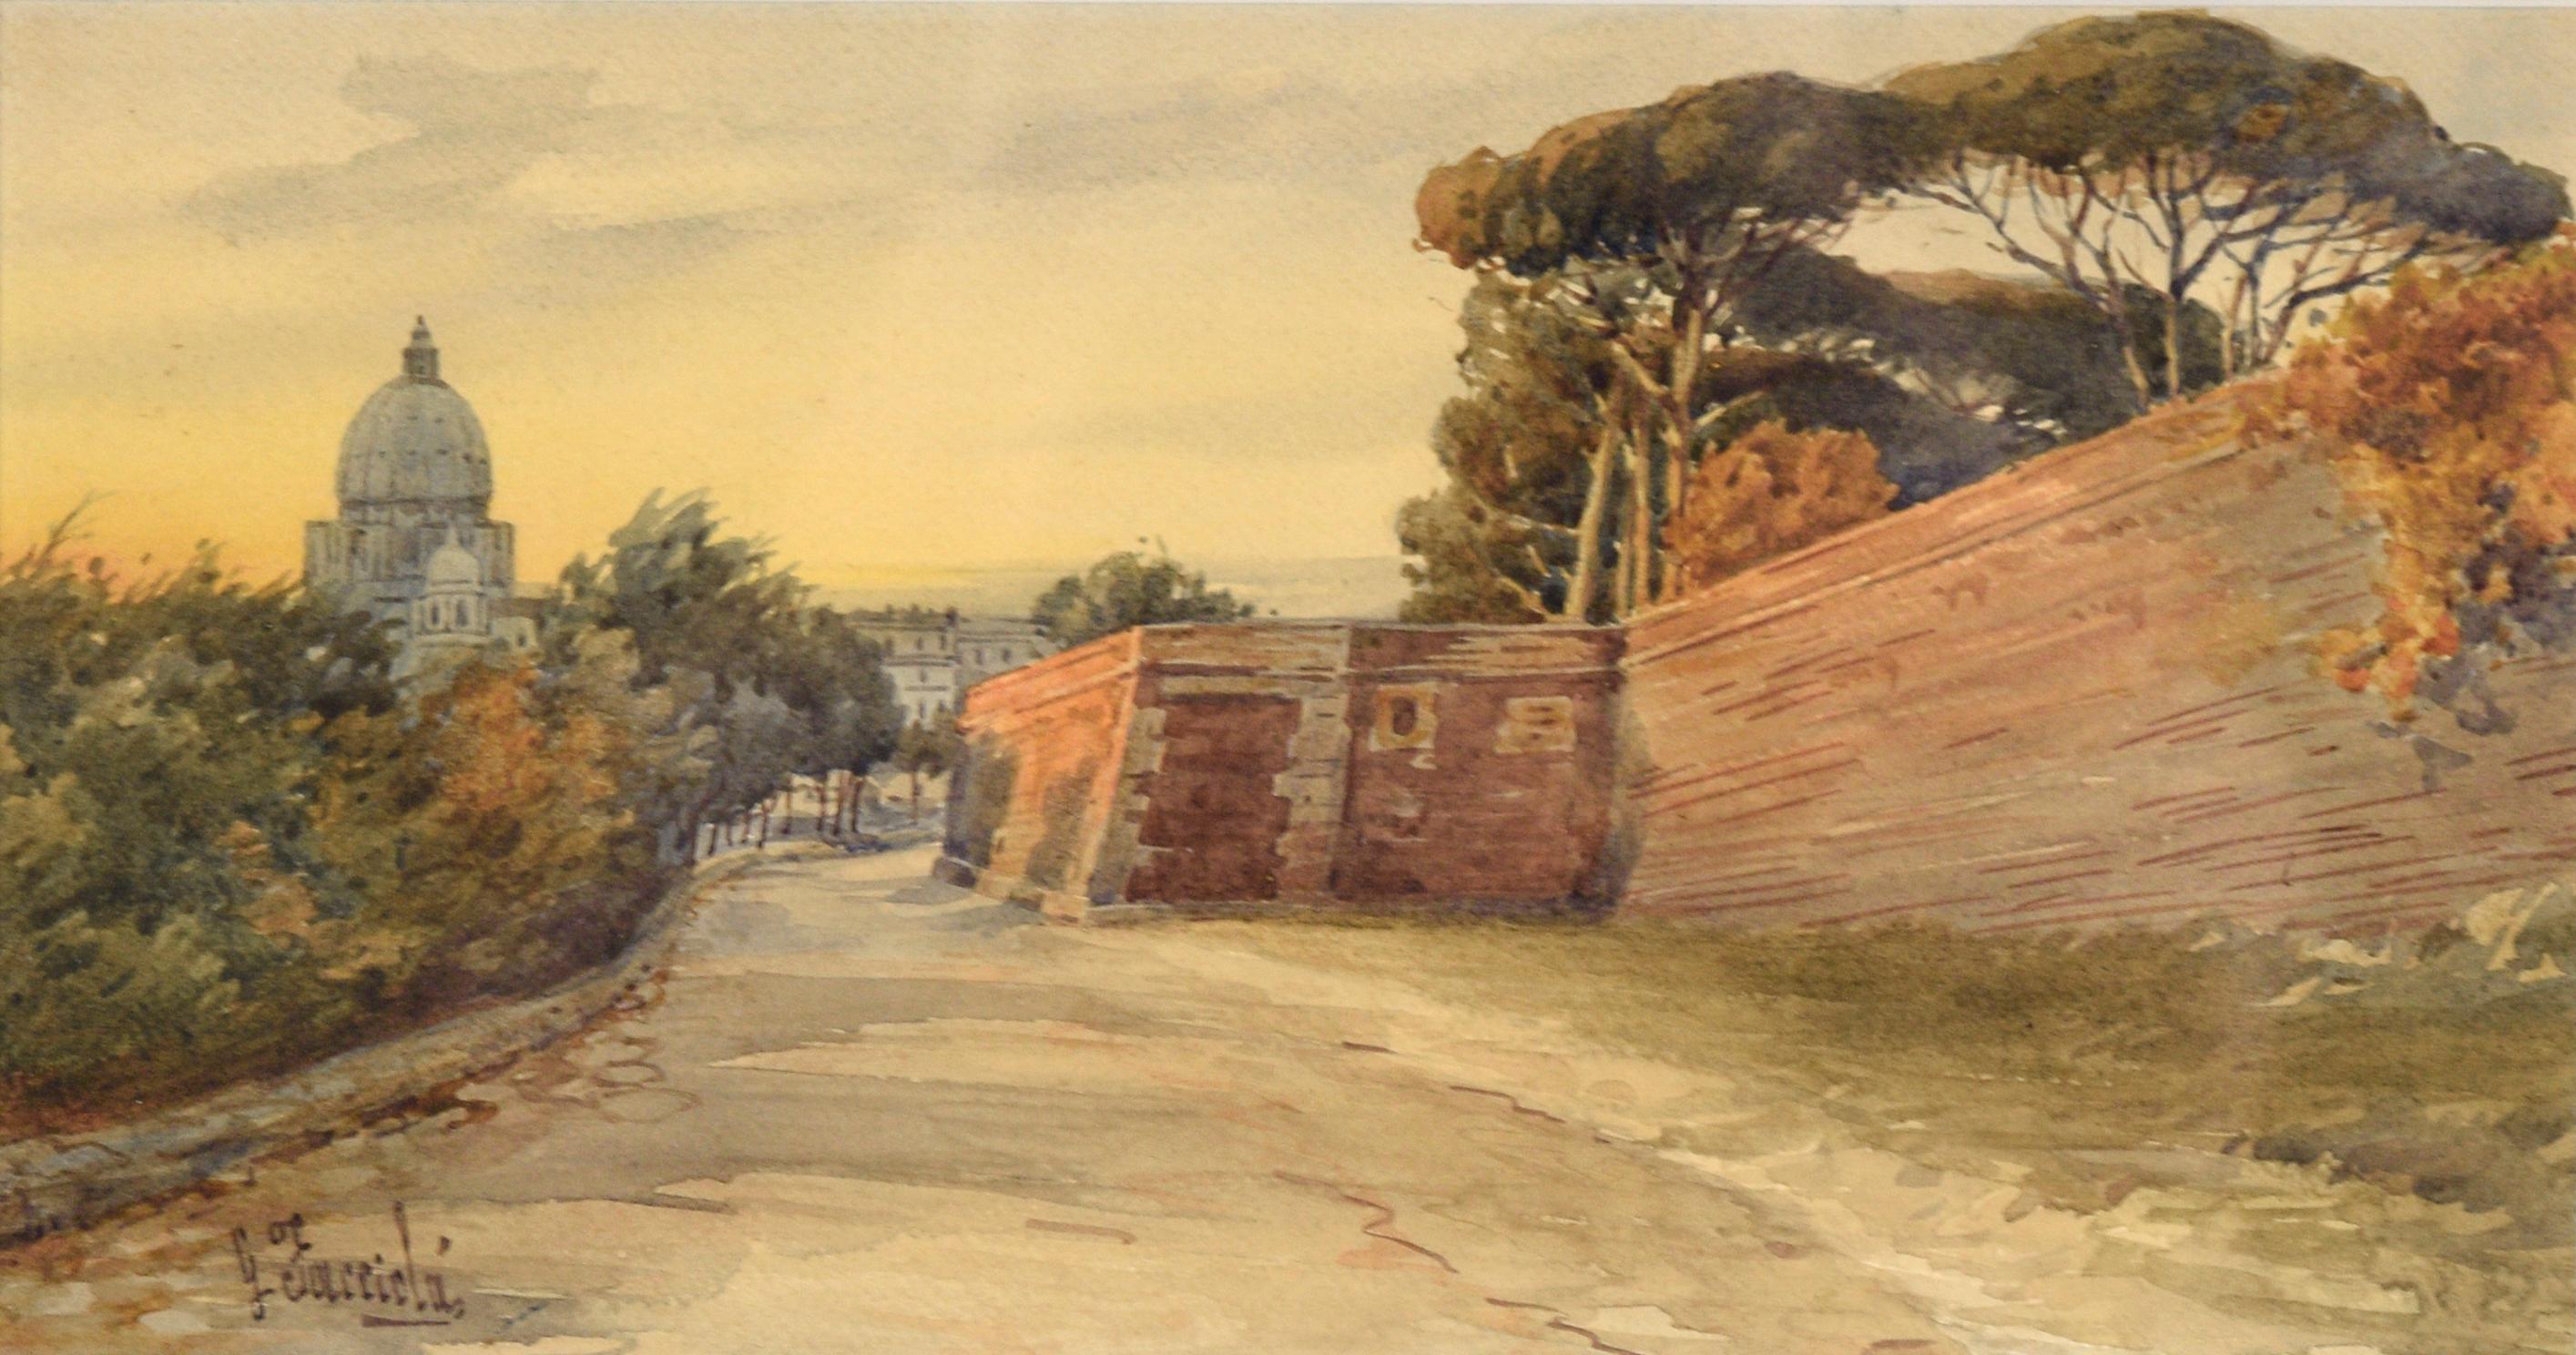 St. Peter's Basilica from the Edge of the City - Roman Lansdcape - Art by Gaetano Facciola